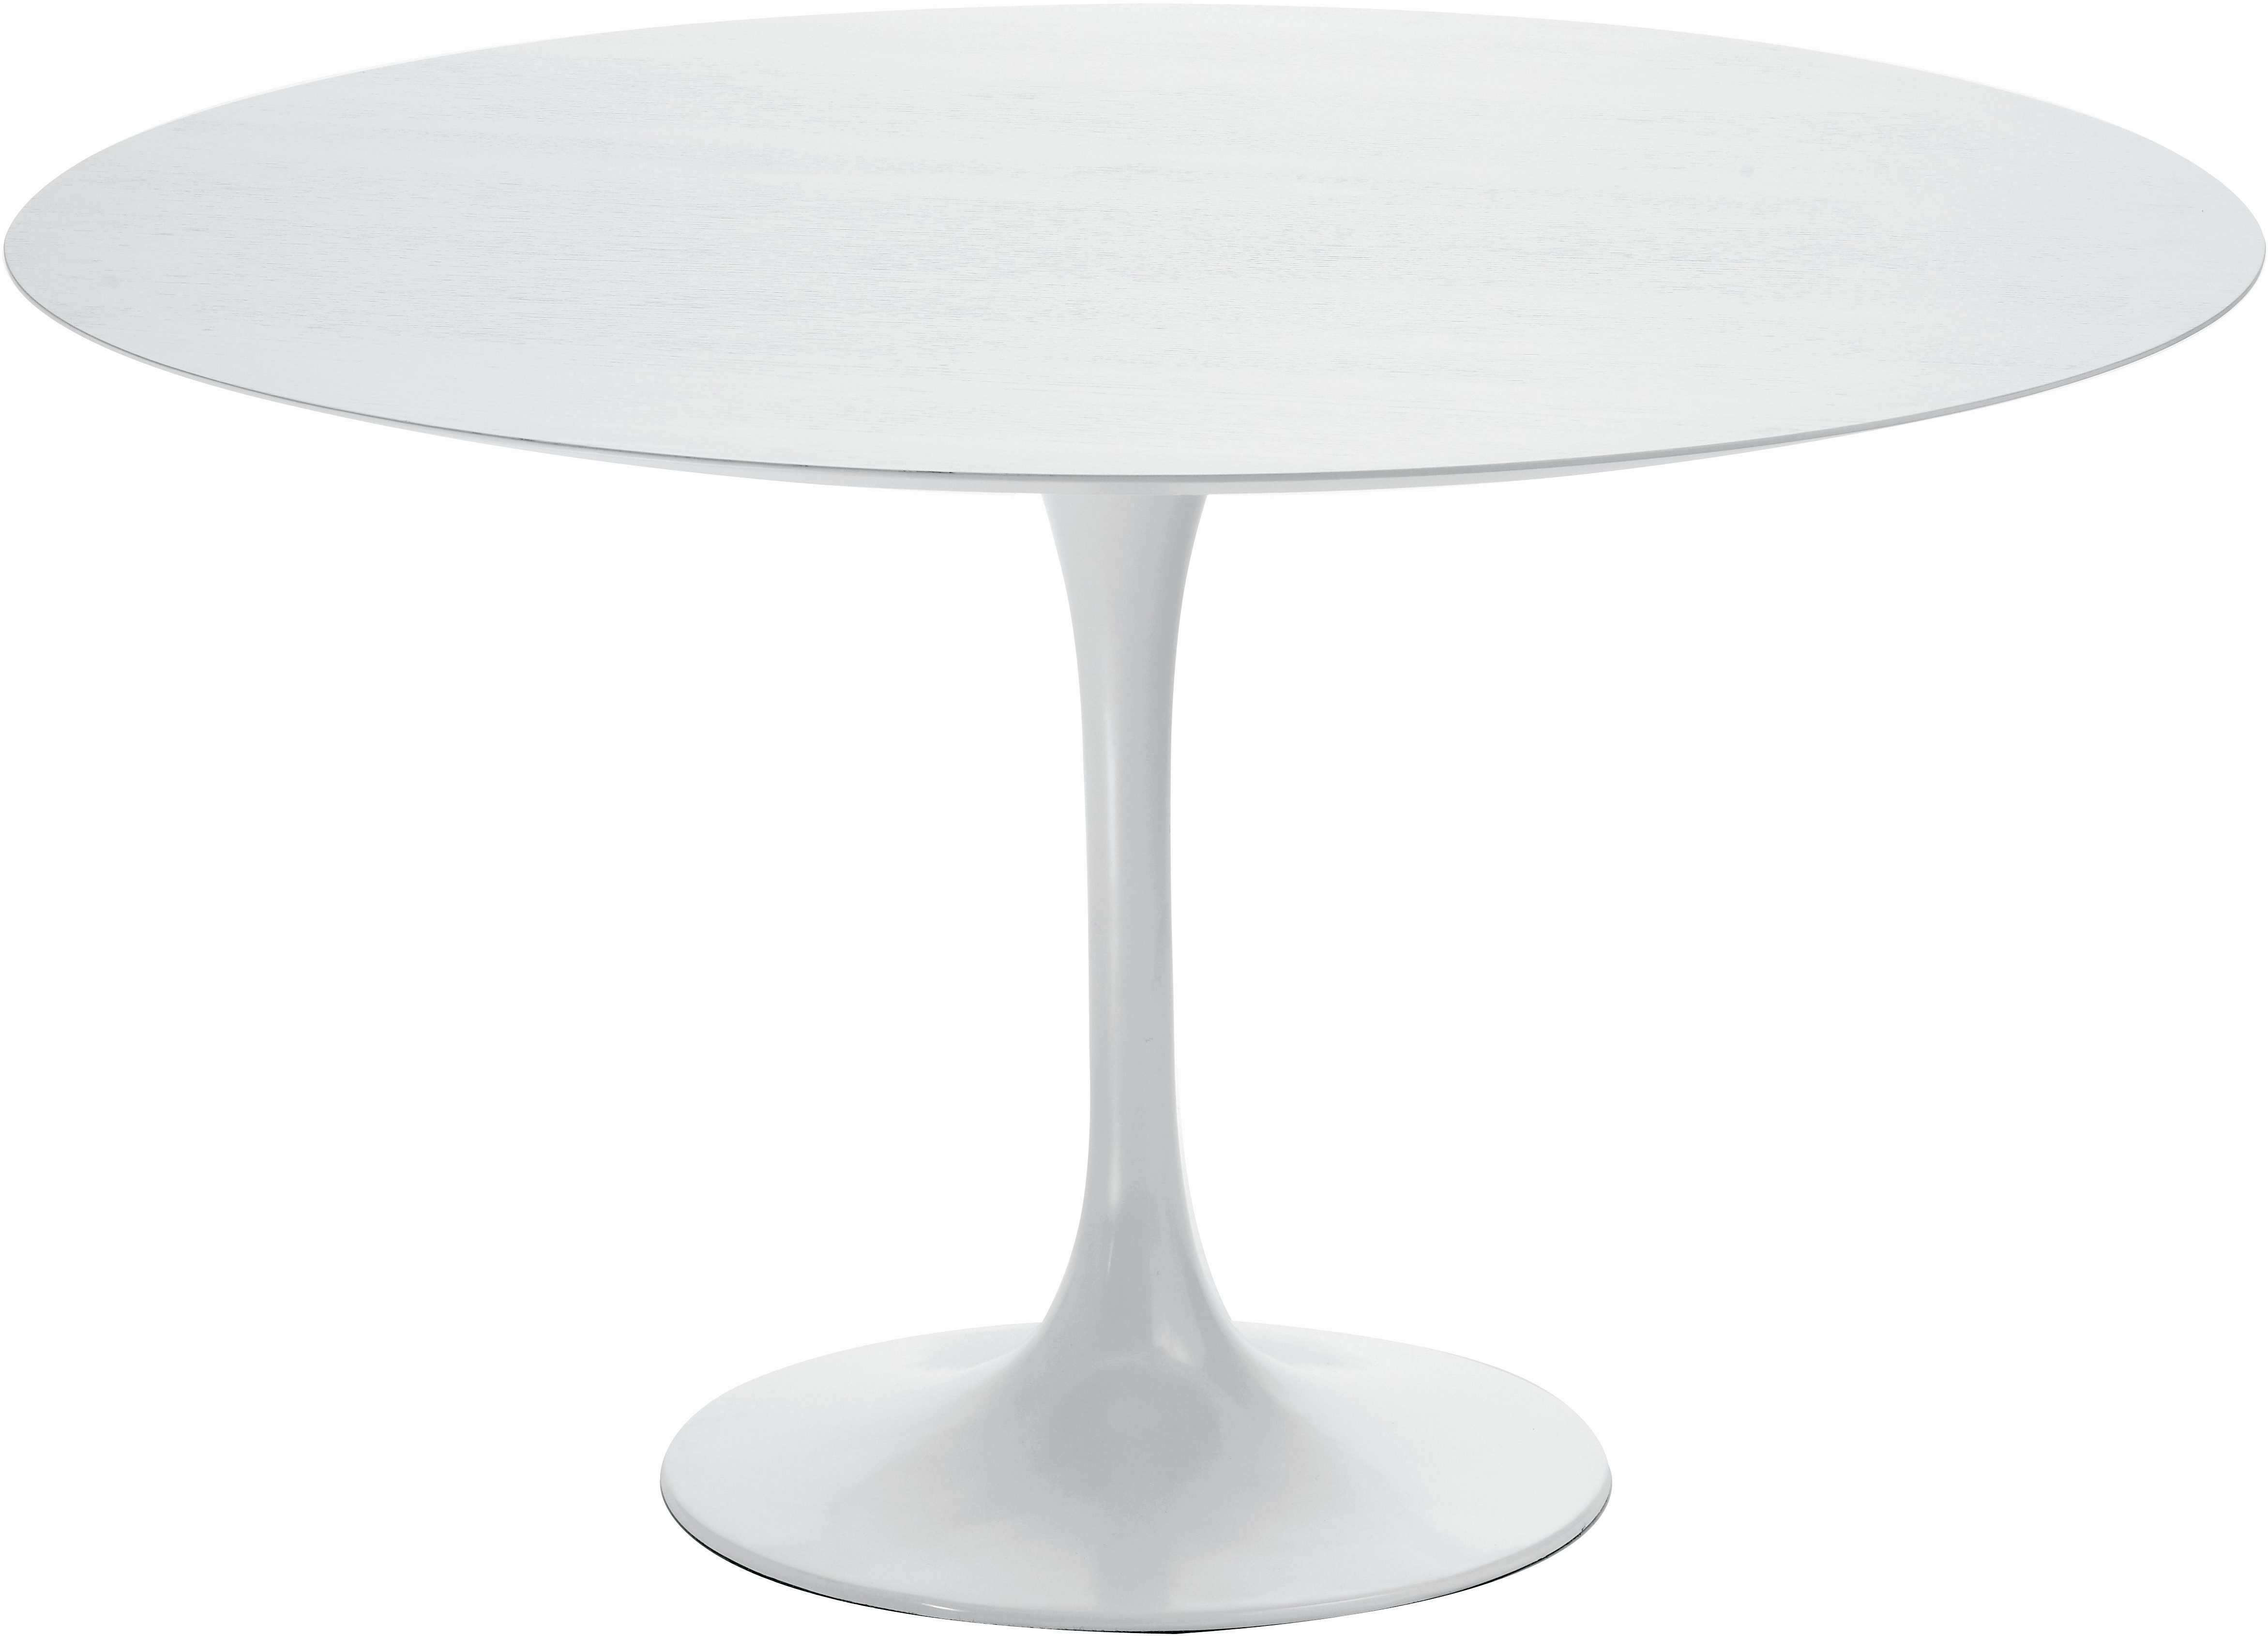 the nuevo cal dining table in white